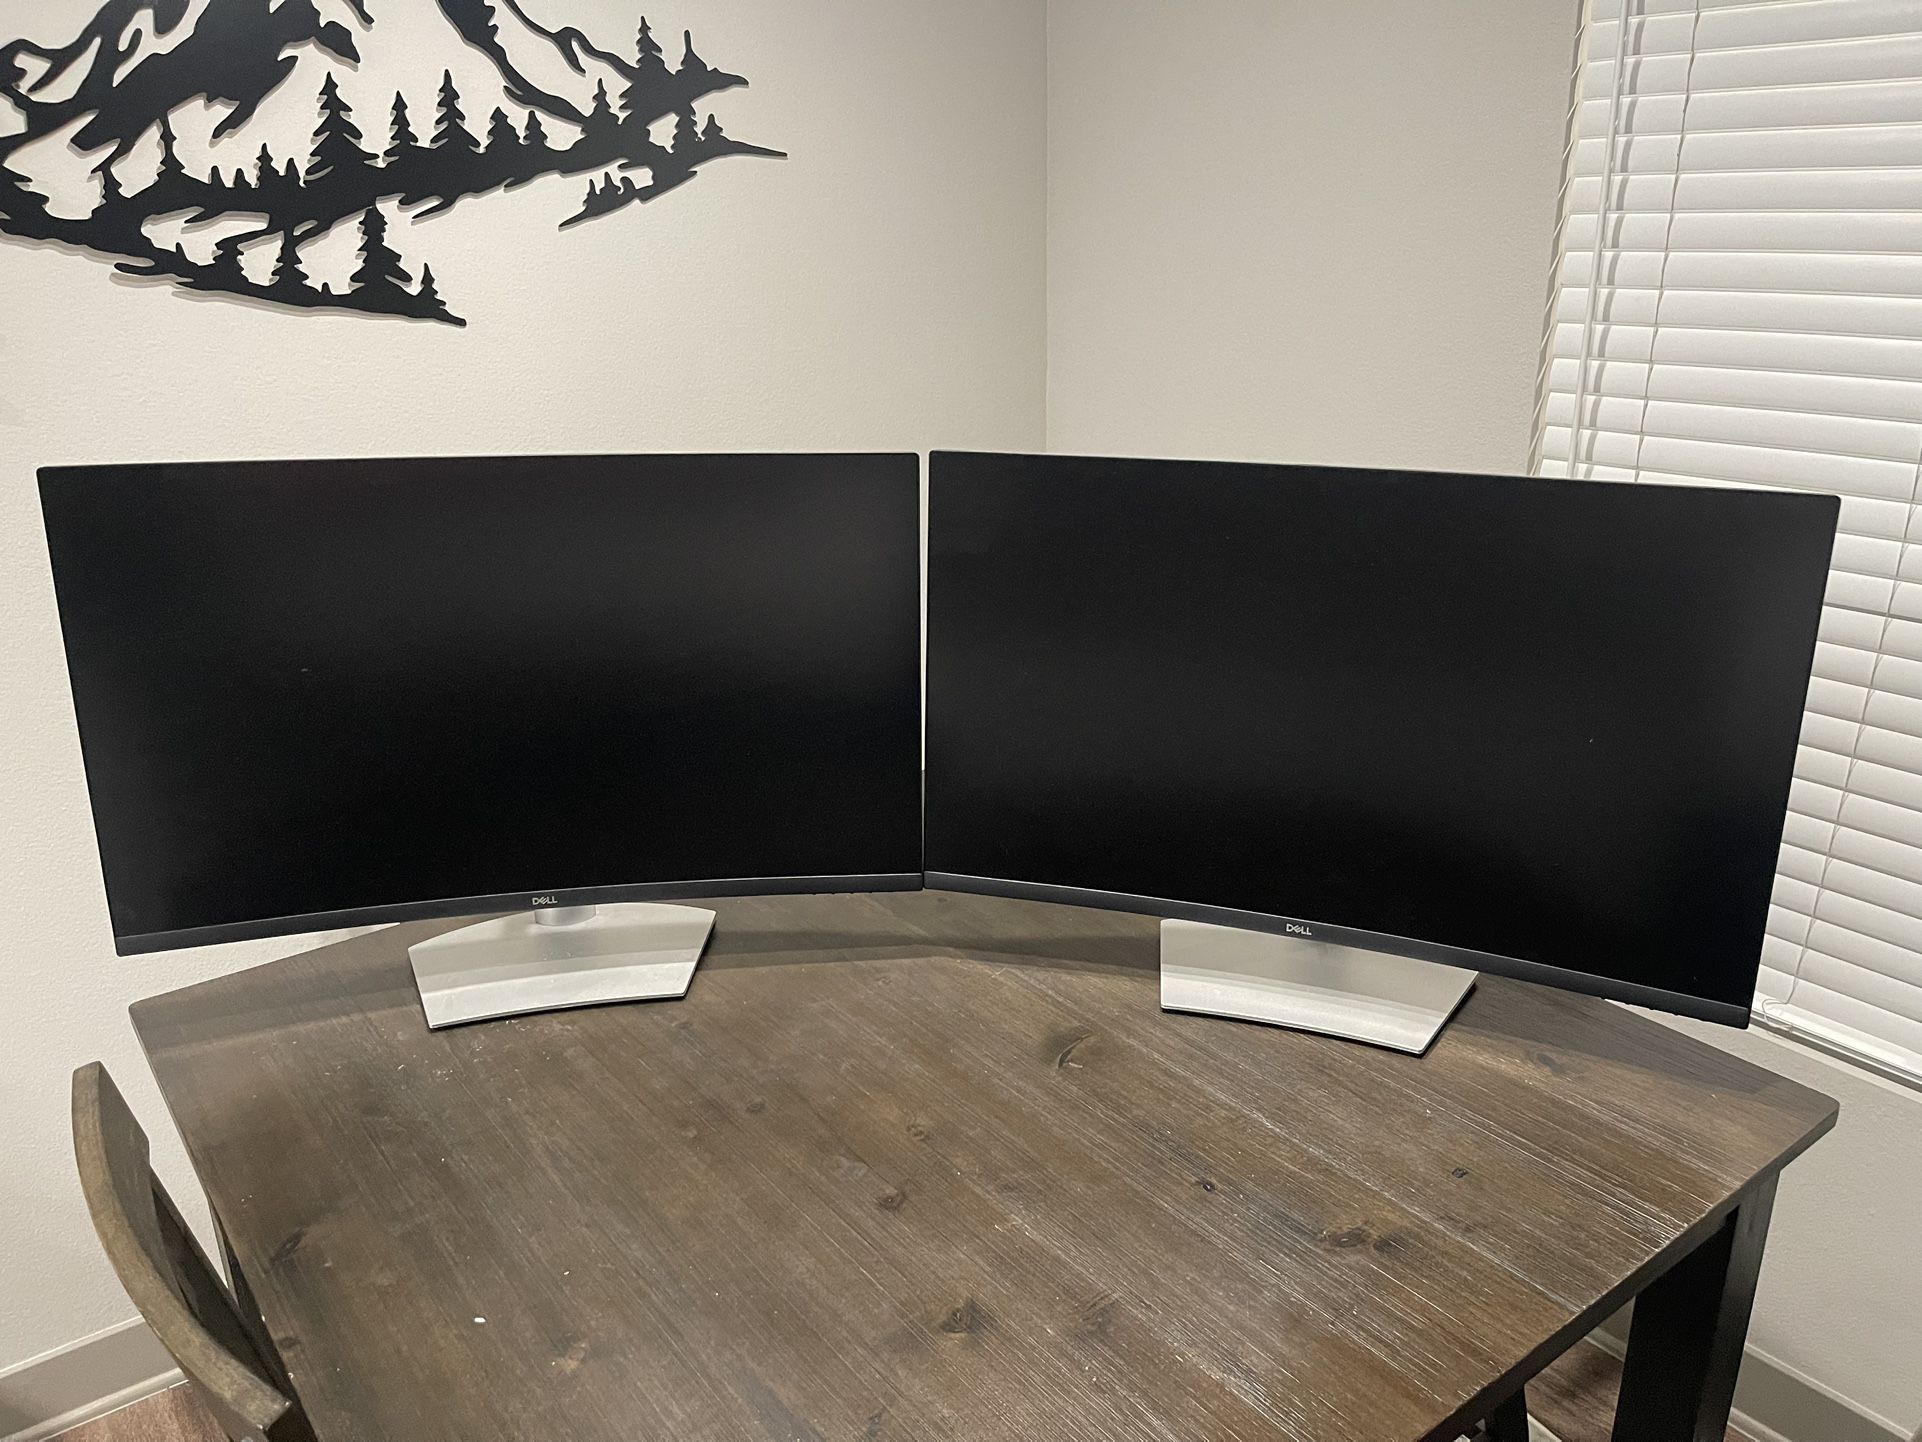 32” Curved monitors 